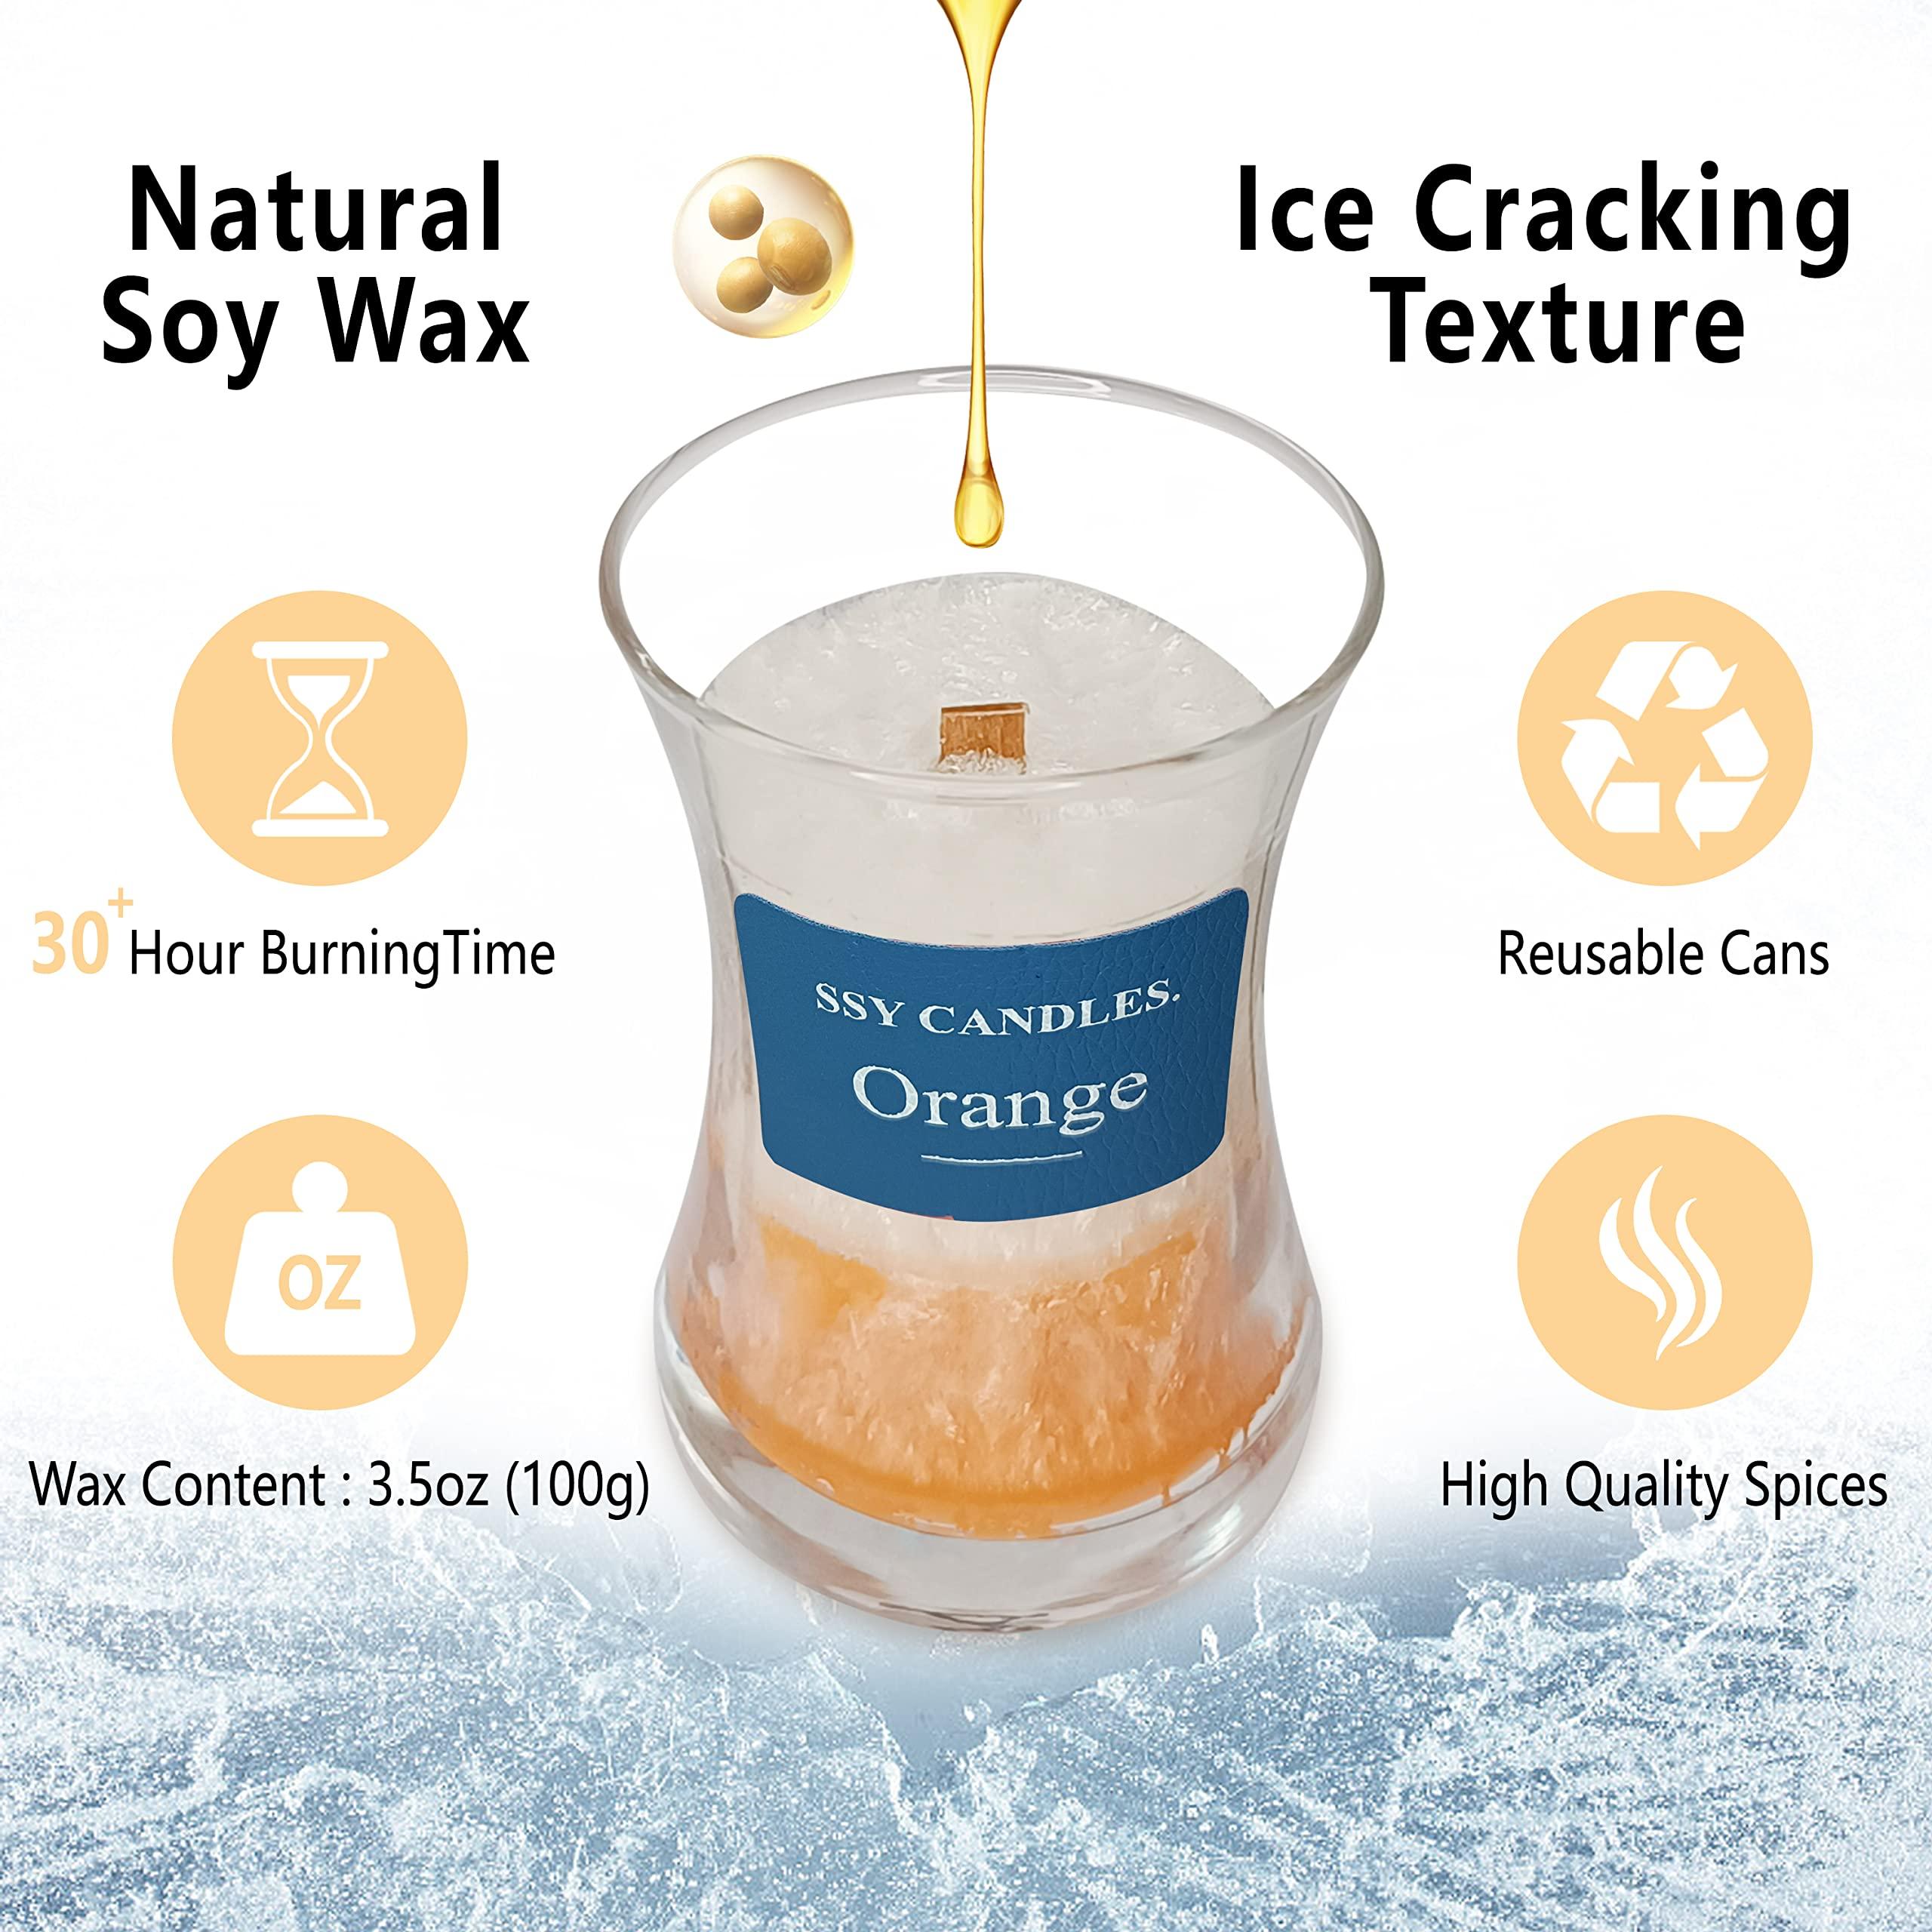 Experience Relaxation with Our Scented Jar Candle - 100% Natural Soy Wax, Burns up to 45 Hours, Aromatherapy Candle Gift for Any Occasion (#3 Single Violets) 2